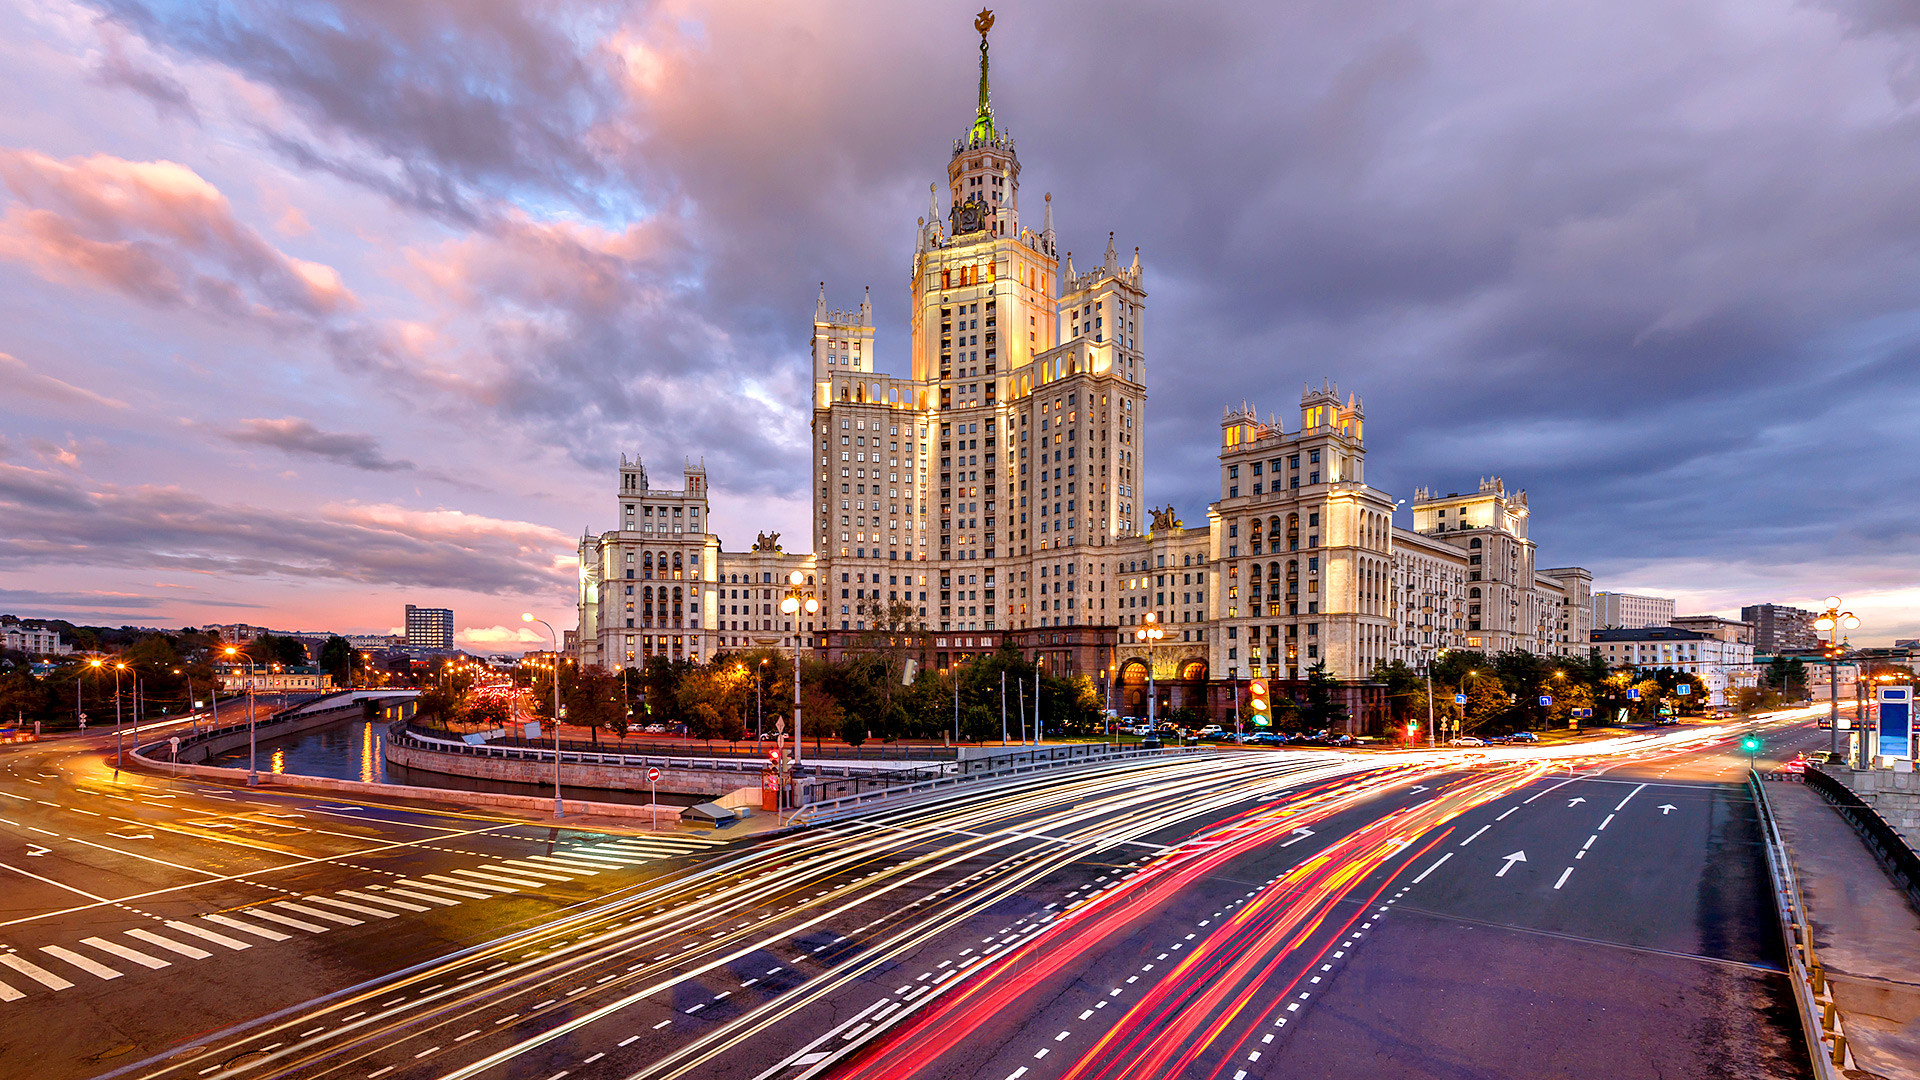 The seven skyscrapers gave birth to a unique architectural style known as Stalinist Empire or Socialist Classicism, inspired by American skyscrapers.